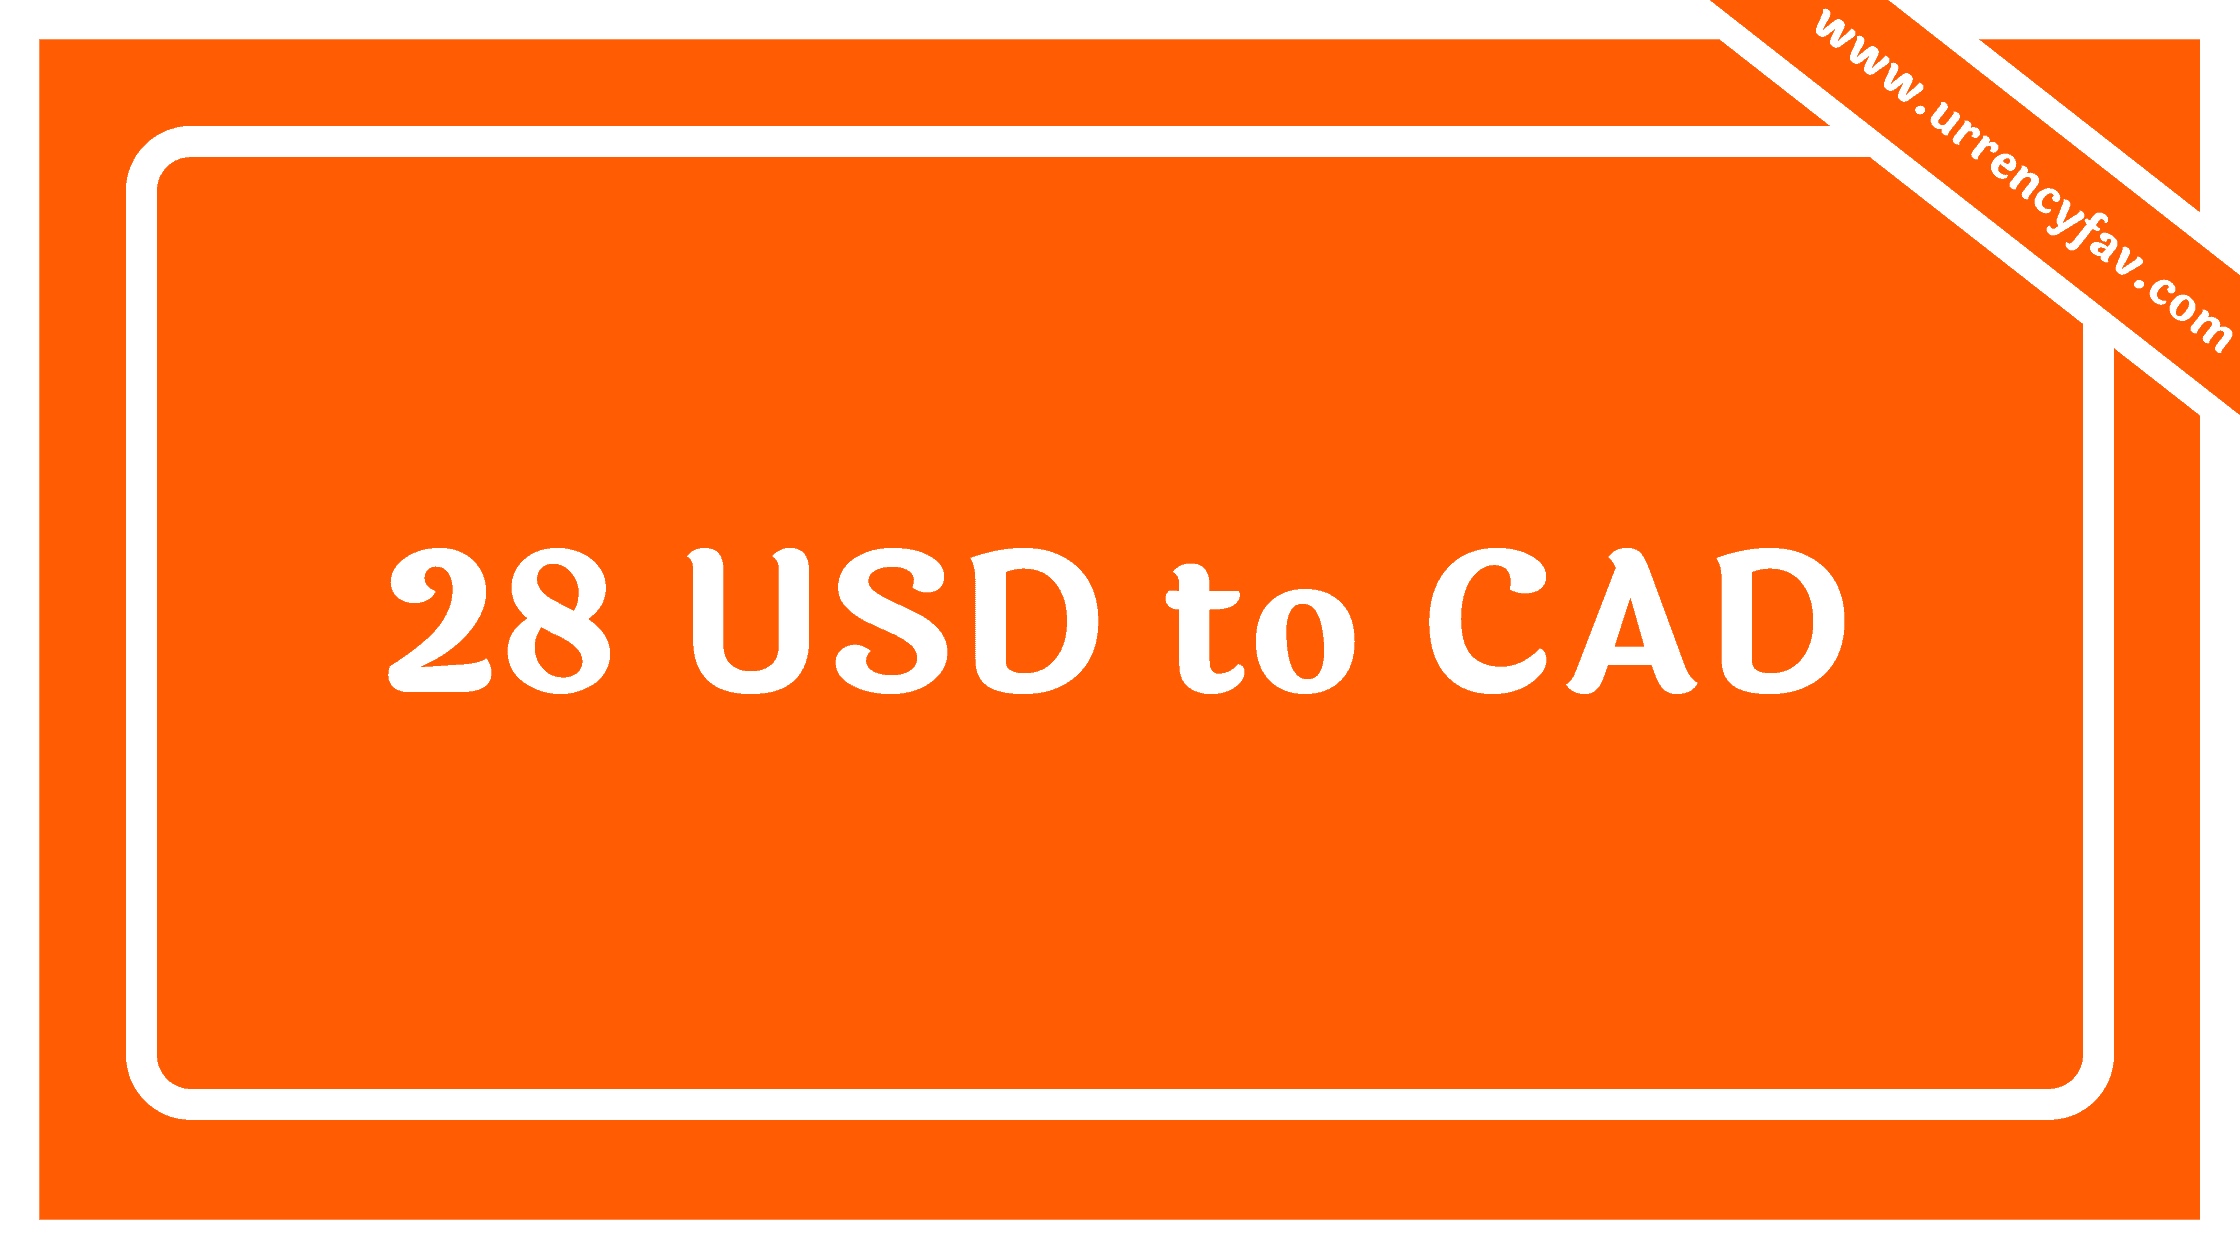 28 USD to CAD